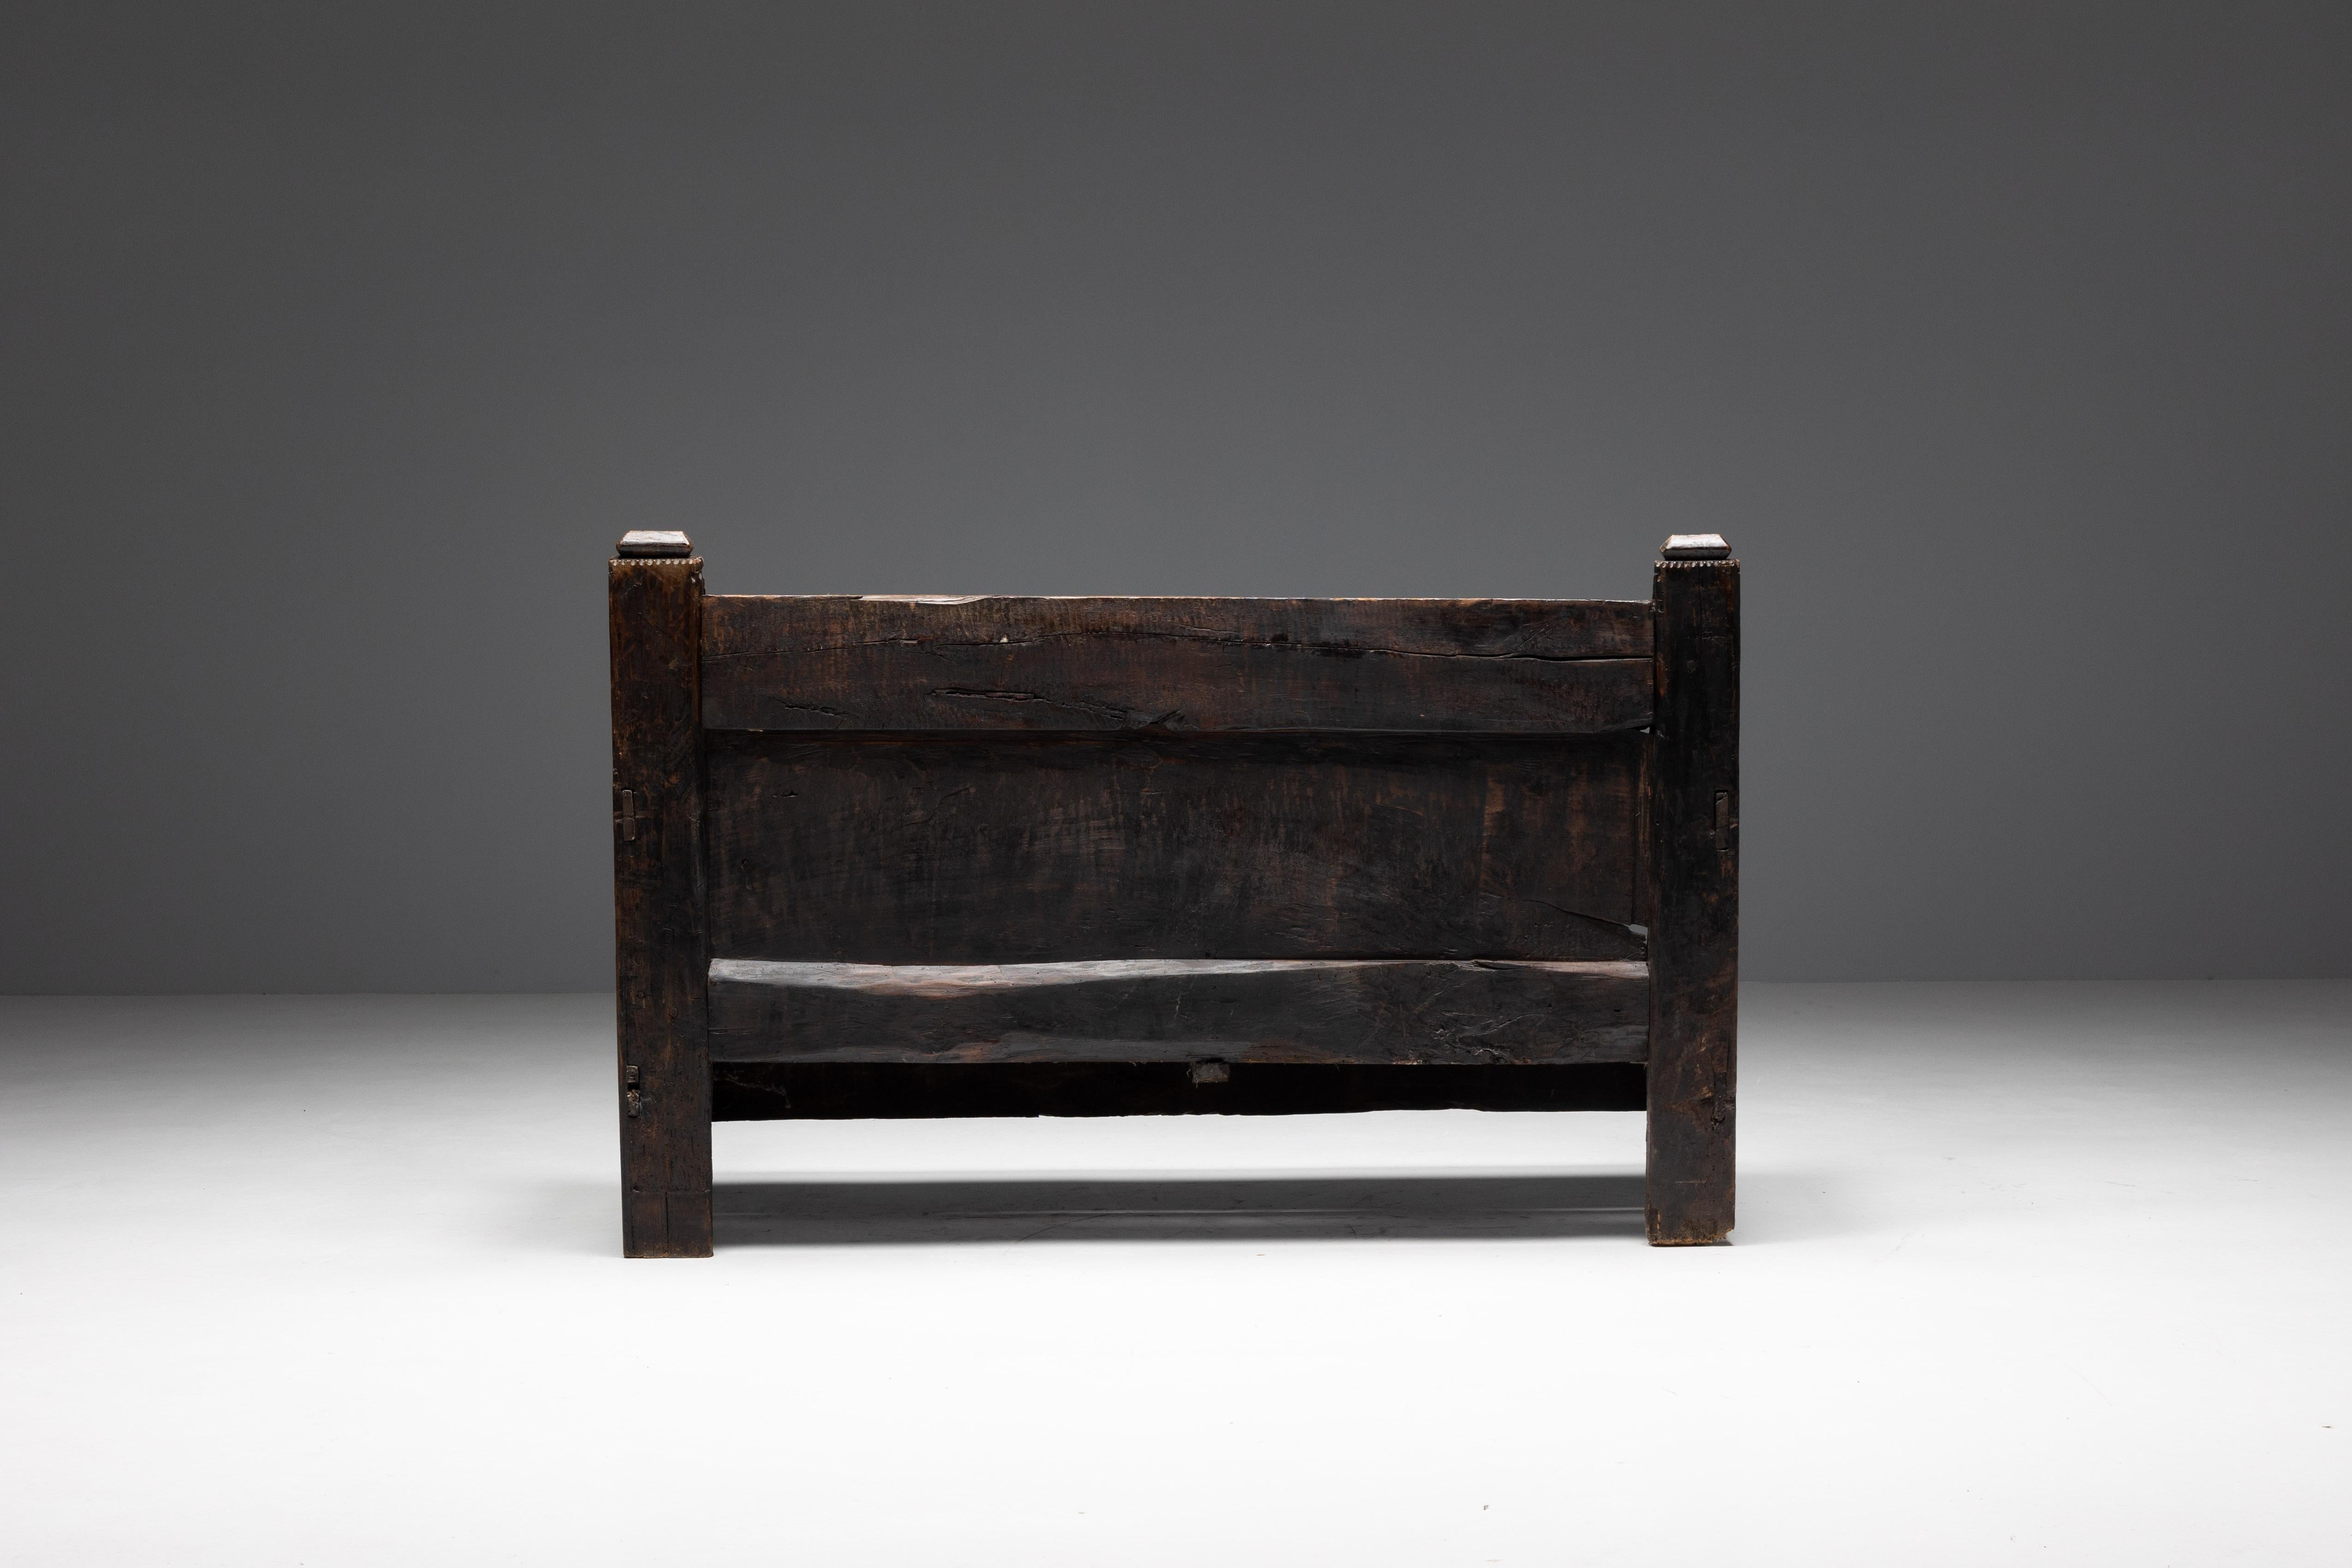 Rustic Art Populaire Bench, France, 19th Century For Sale 6